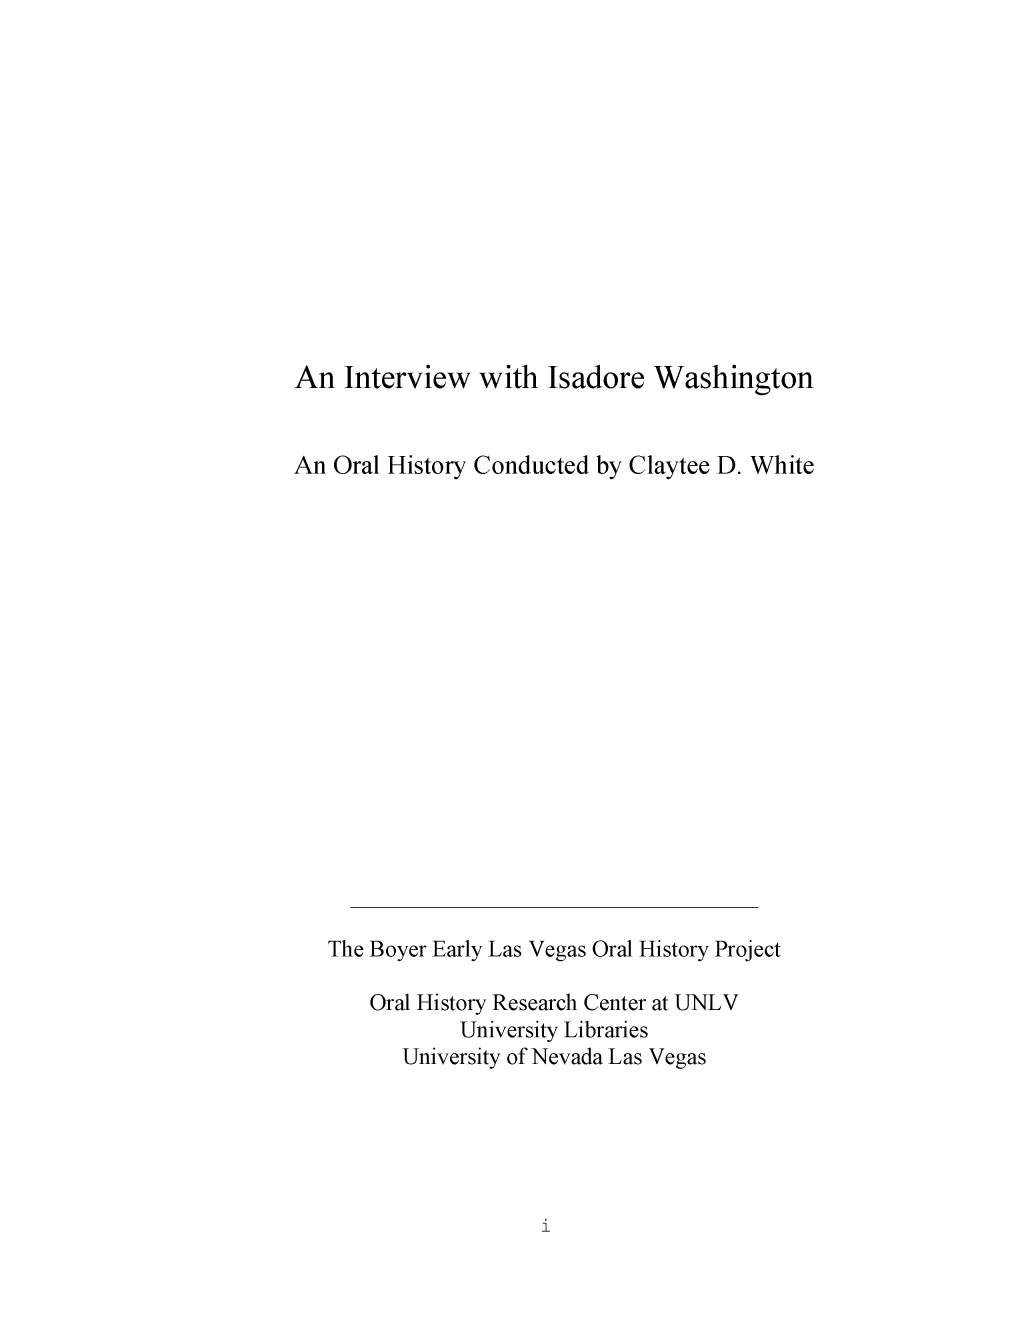 An Interview with Isadore Washington